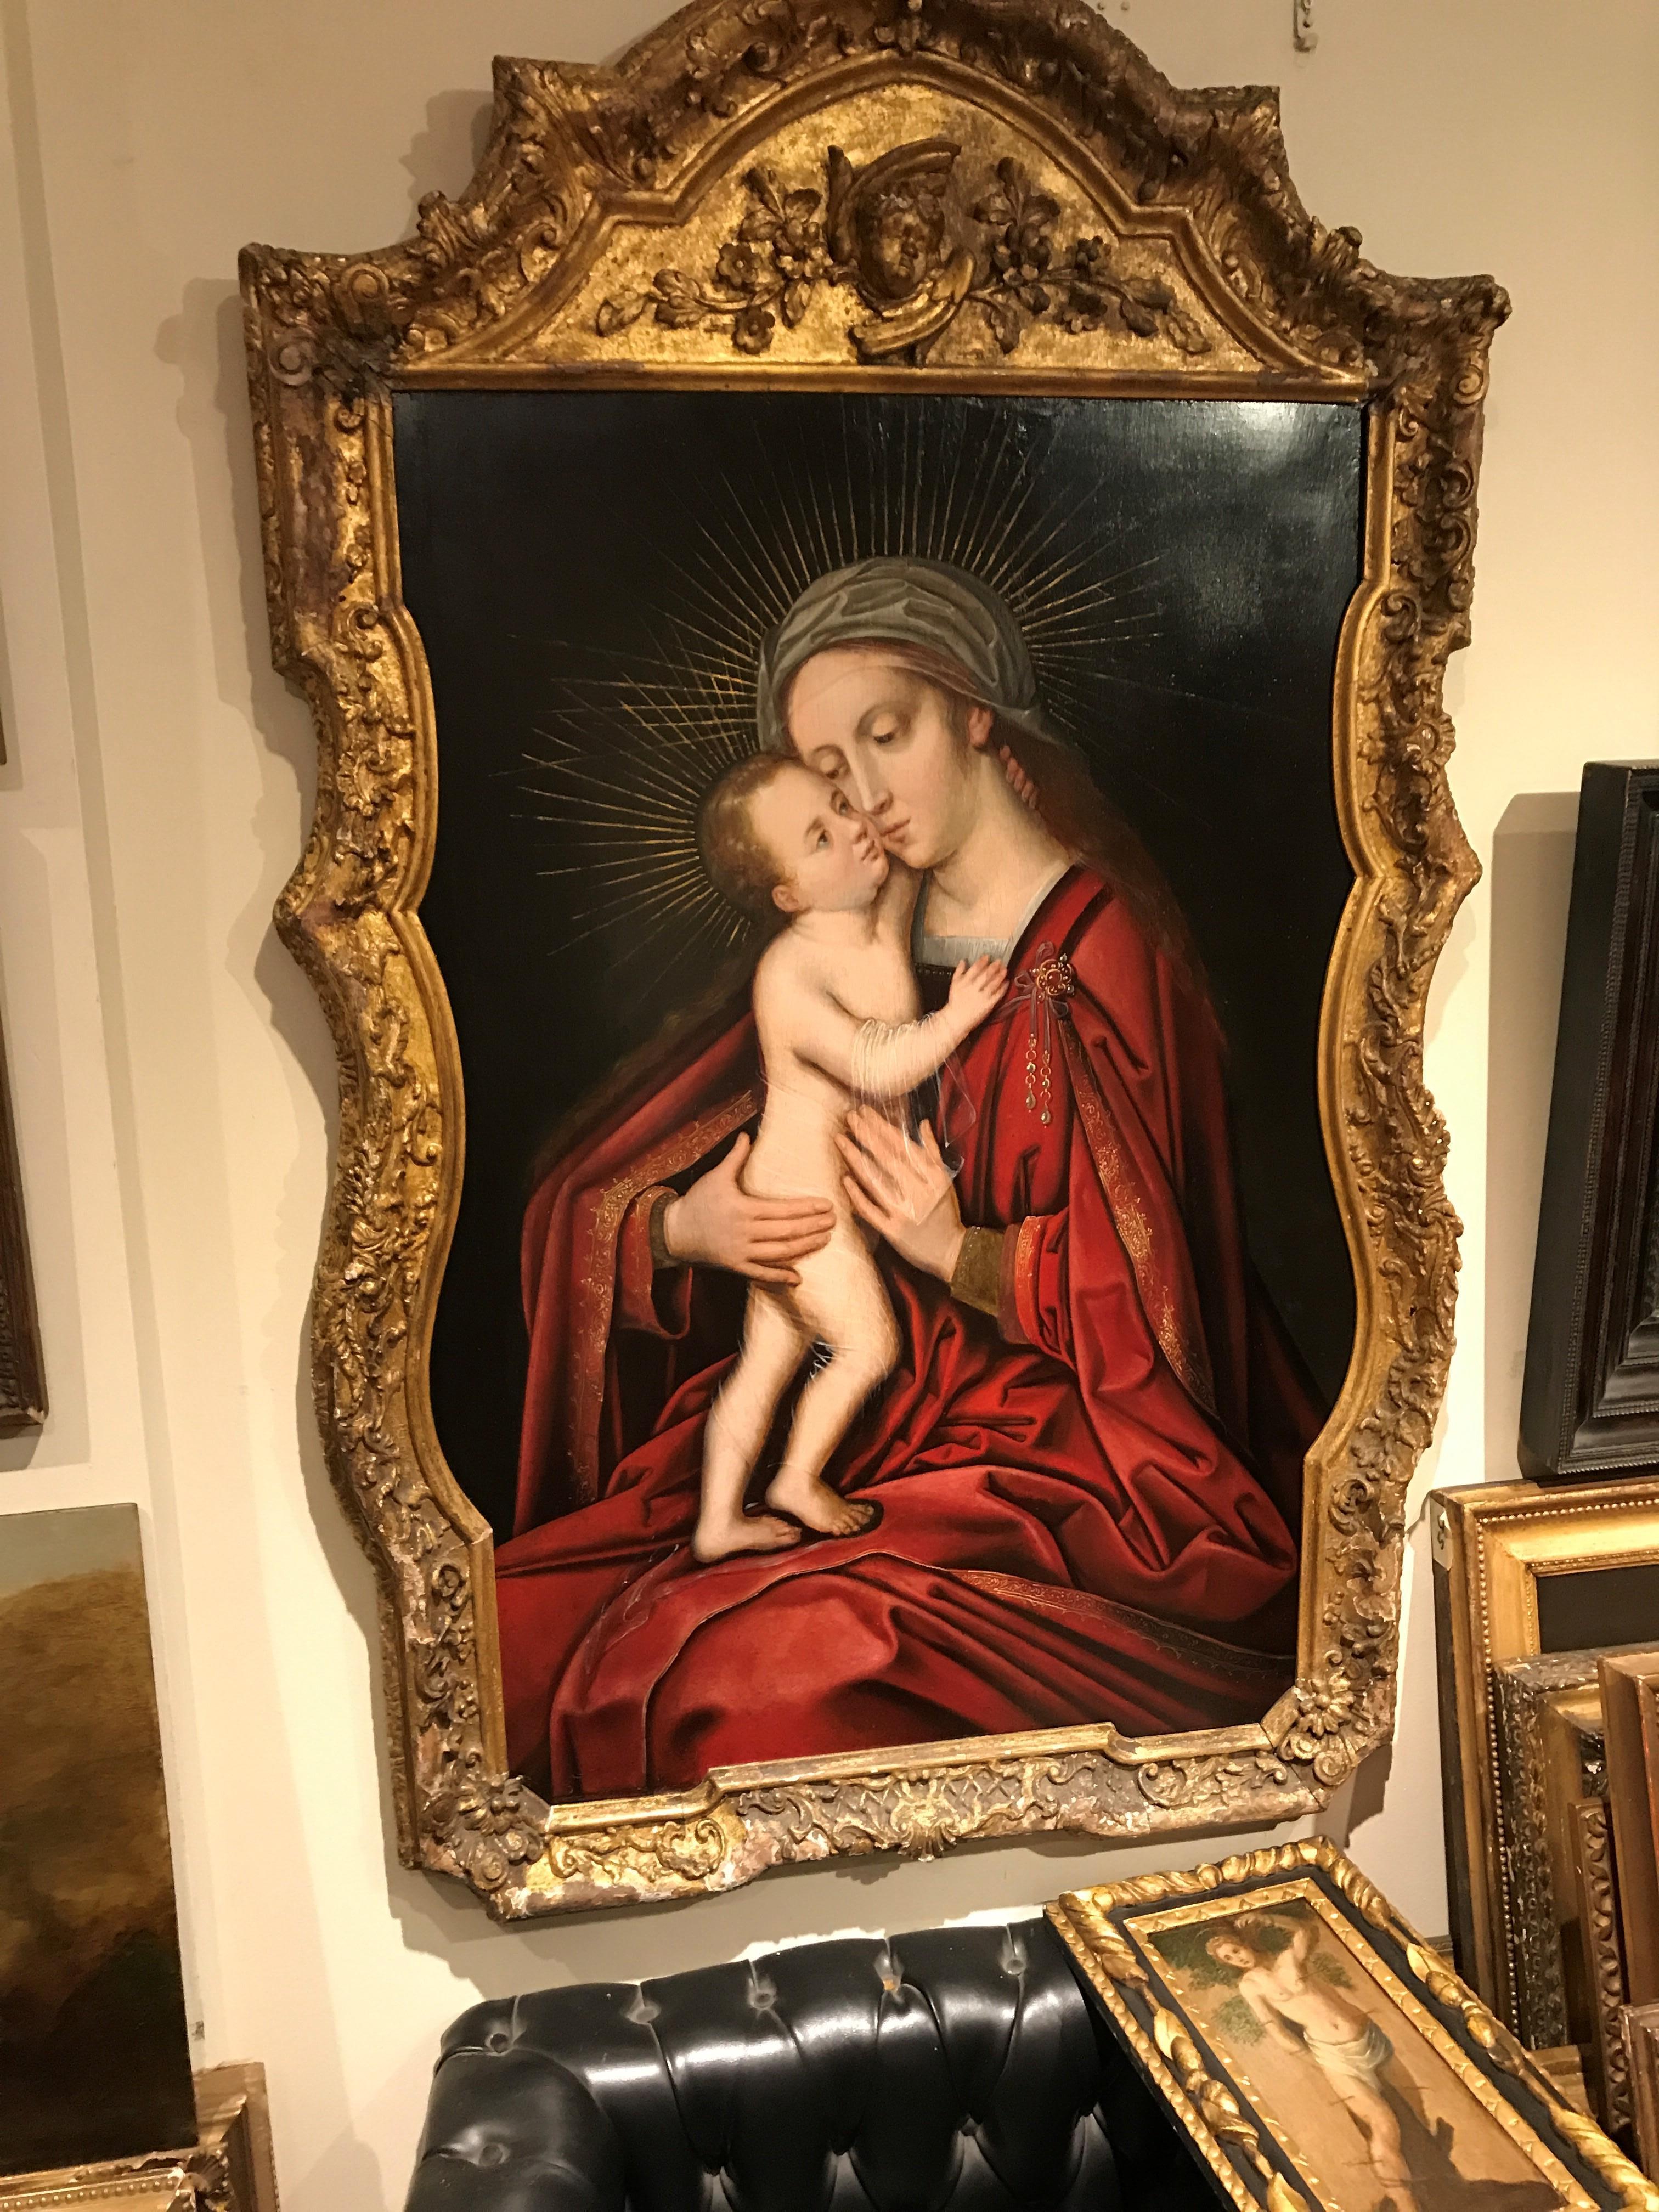 Virgin and Child
Italian circa 1520
Oil on panel in a carved, shaped, giltwood early frame
41 x 27 inches; 55 x 37 inc. frame

Provenance:
Sold by Mrs. F. Taylor to Mr. Mori for £18.18 (18gns) at Christie’s the 17th June 1949 as 
‘Lot 67, VAN DER